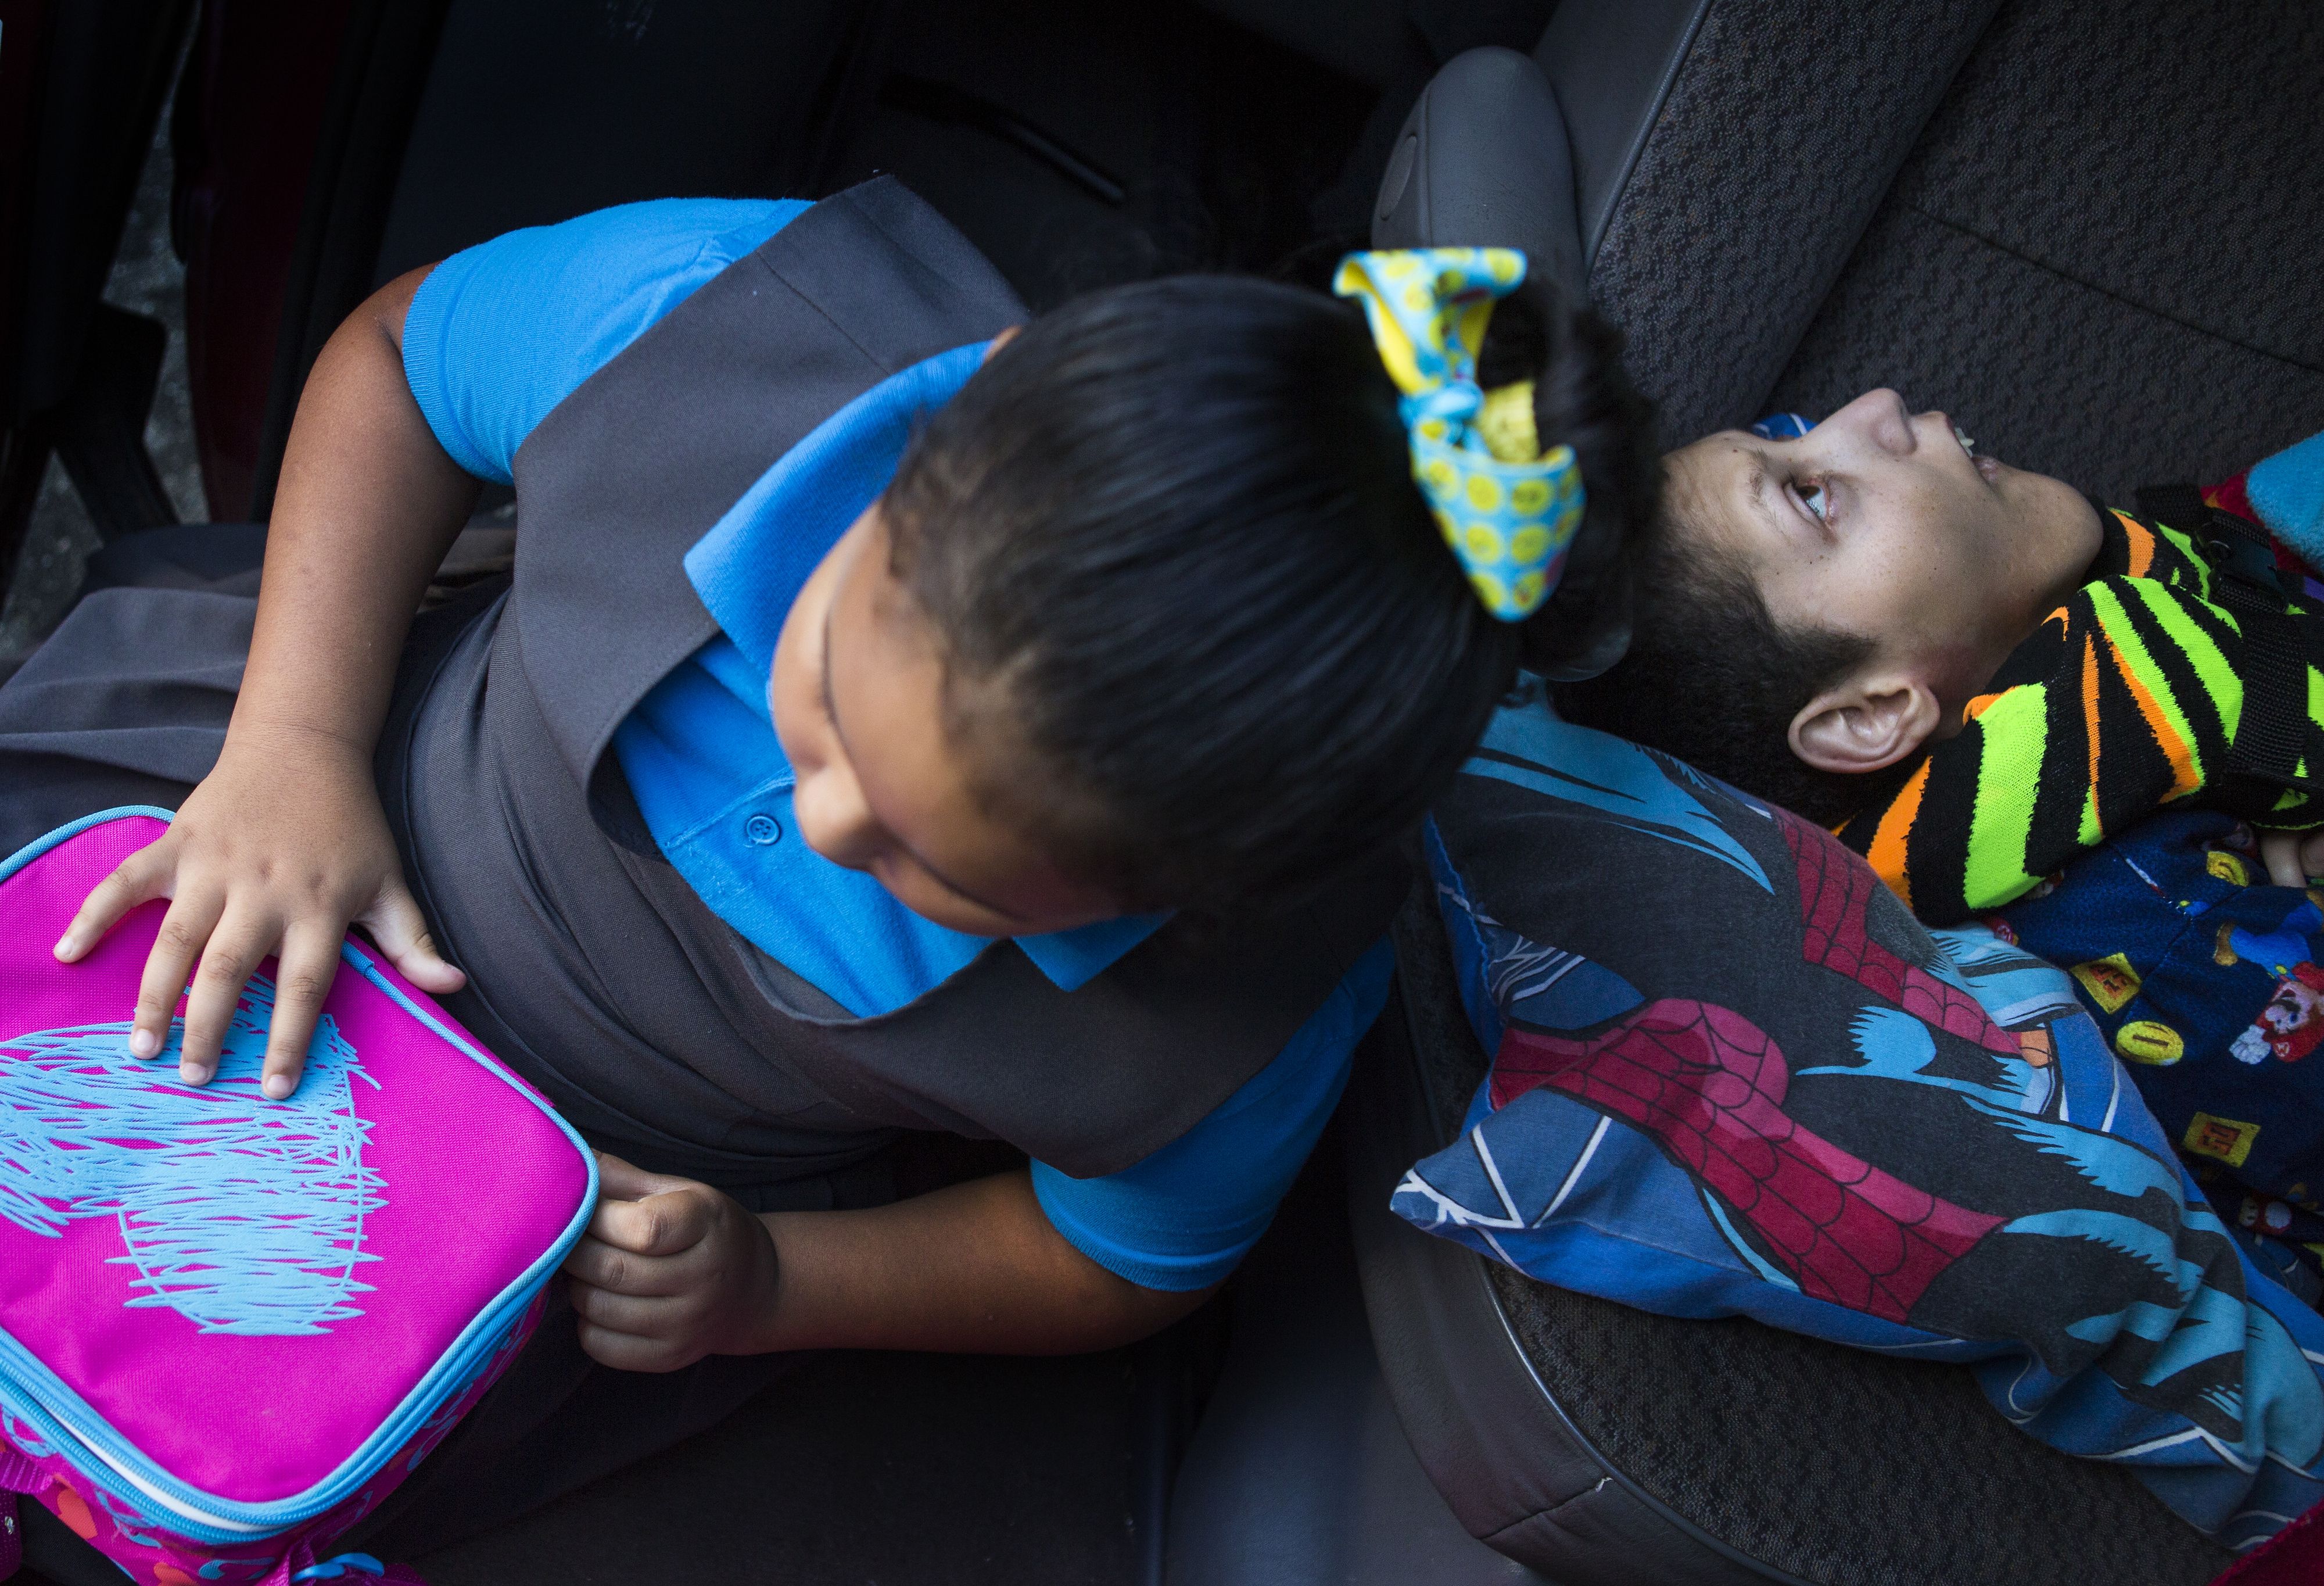 Kylia Jimenez Feliciano, 6, left, who suffers from autism, zips her lunch box as her brother Kenny, lies across the bench seat of the family van prior to leaving for school. Image by Ryan Michalesko. Puerto Rico, 2017.